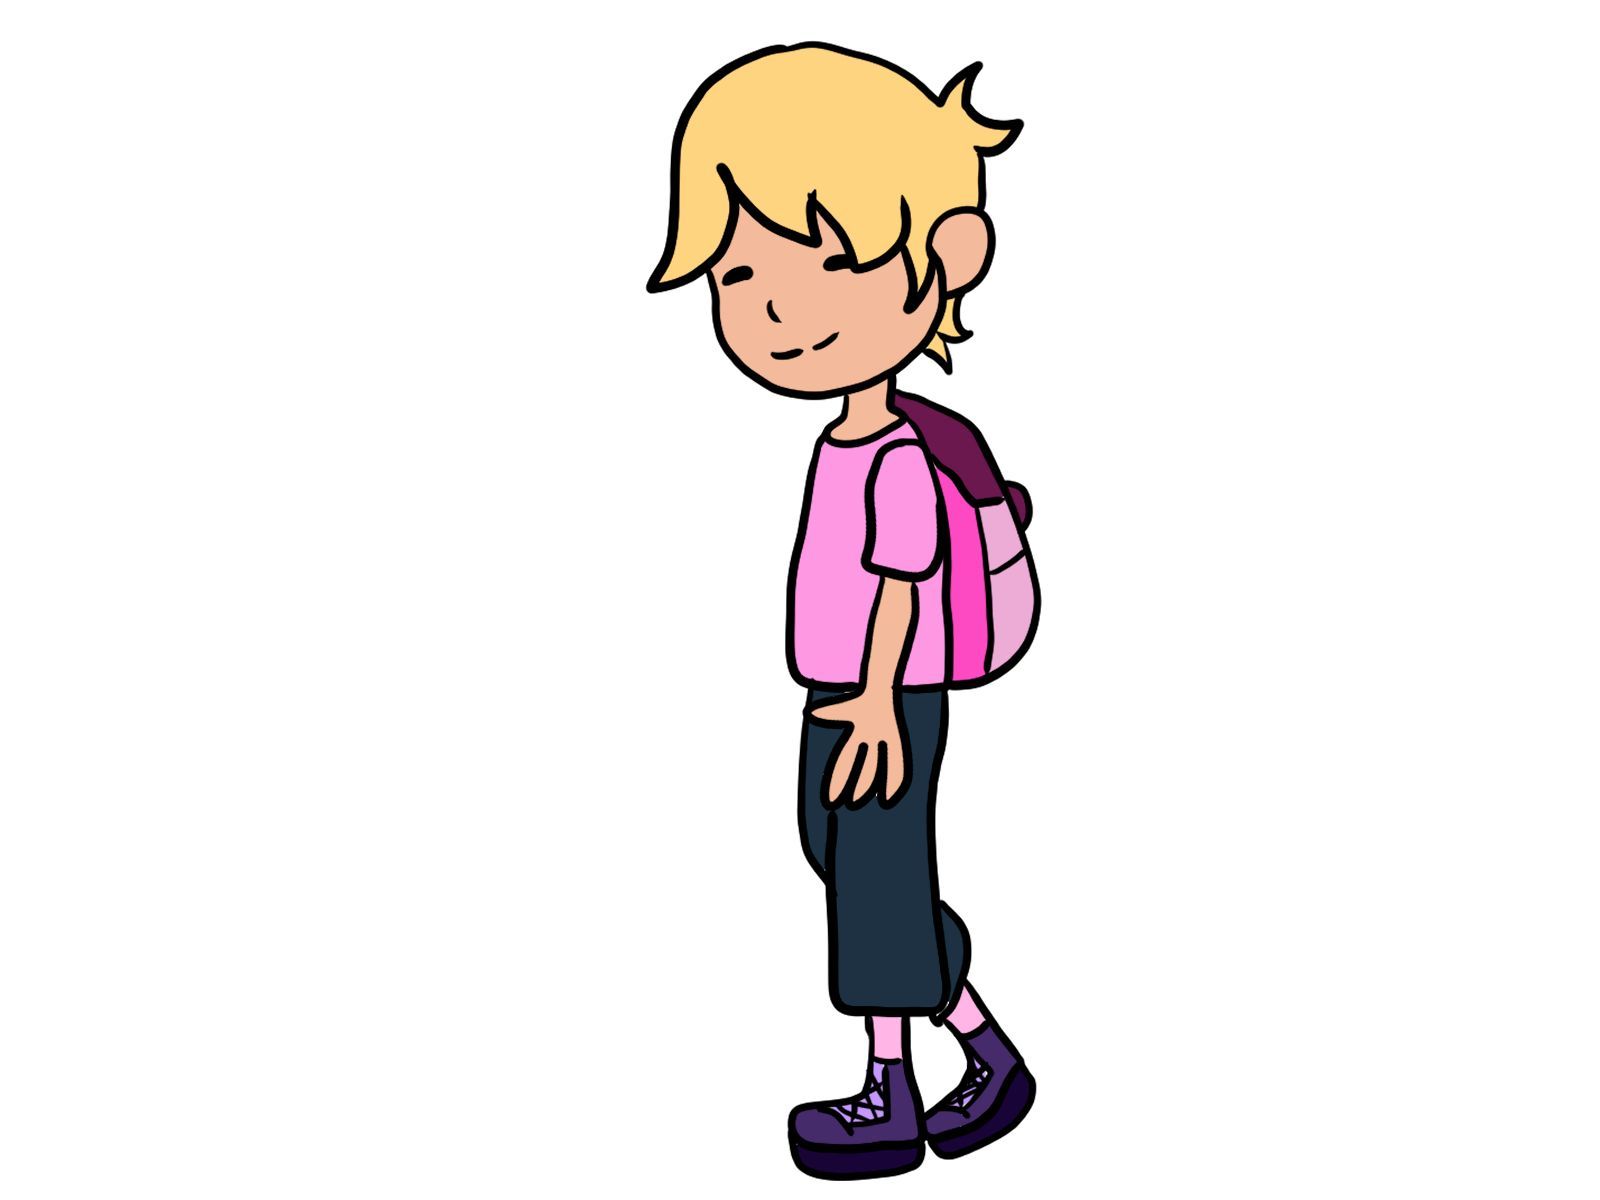 Young person with backpack - Illustration by Indigo Phoenix.